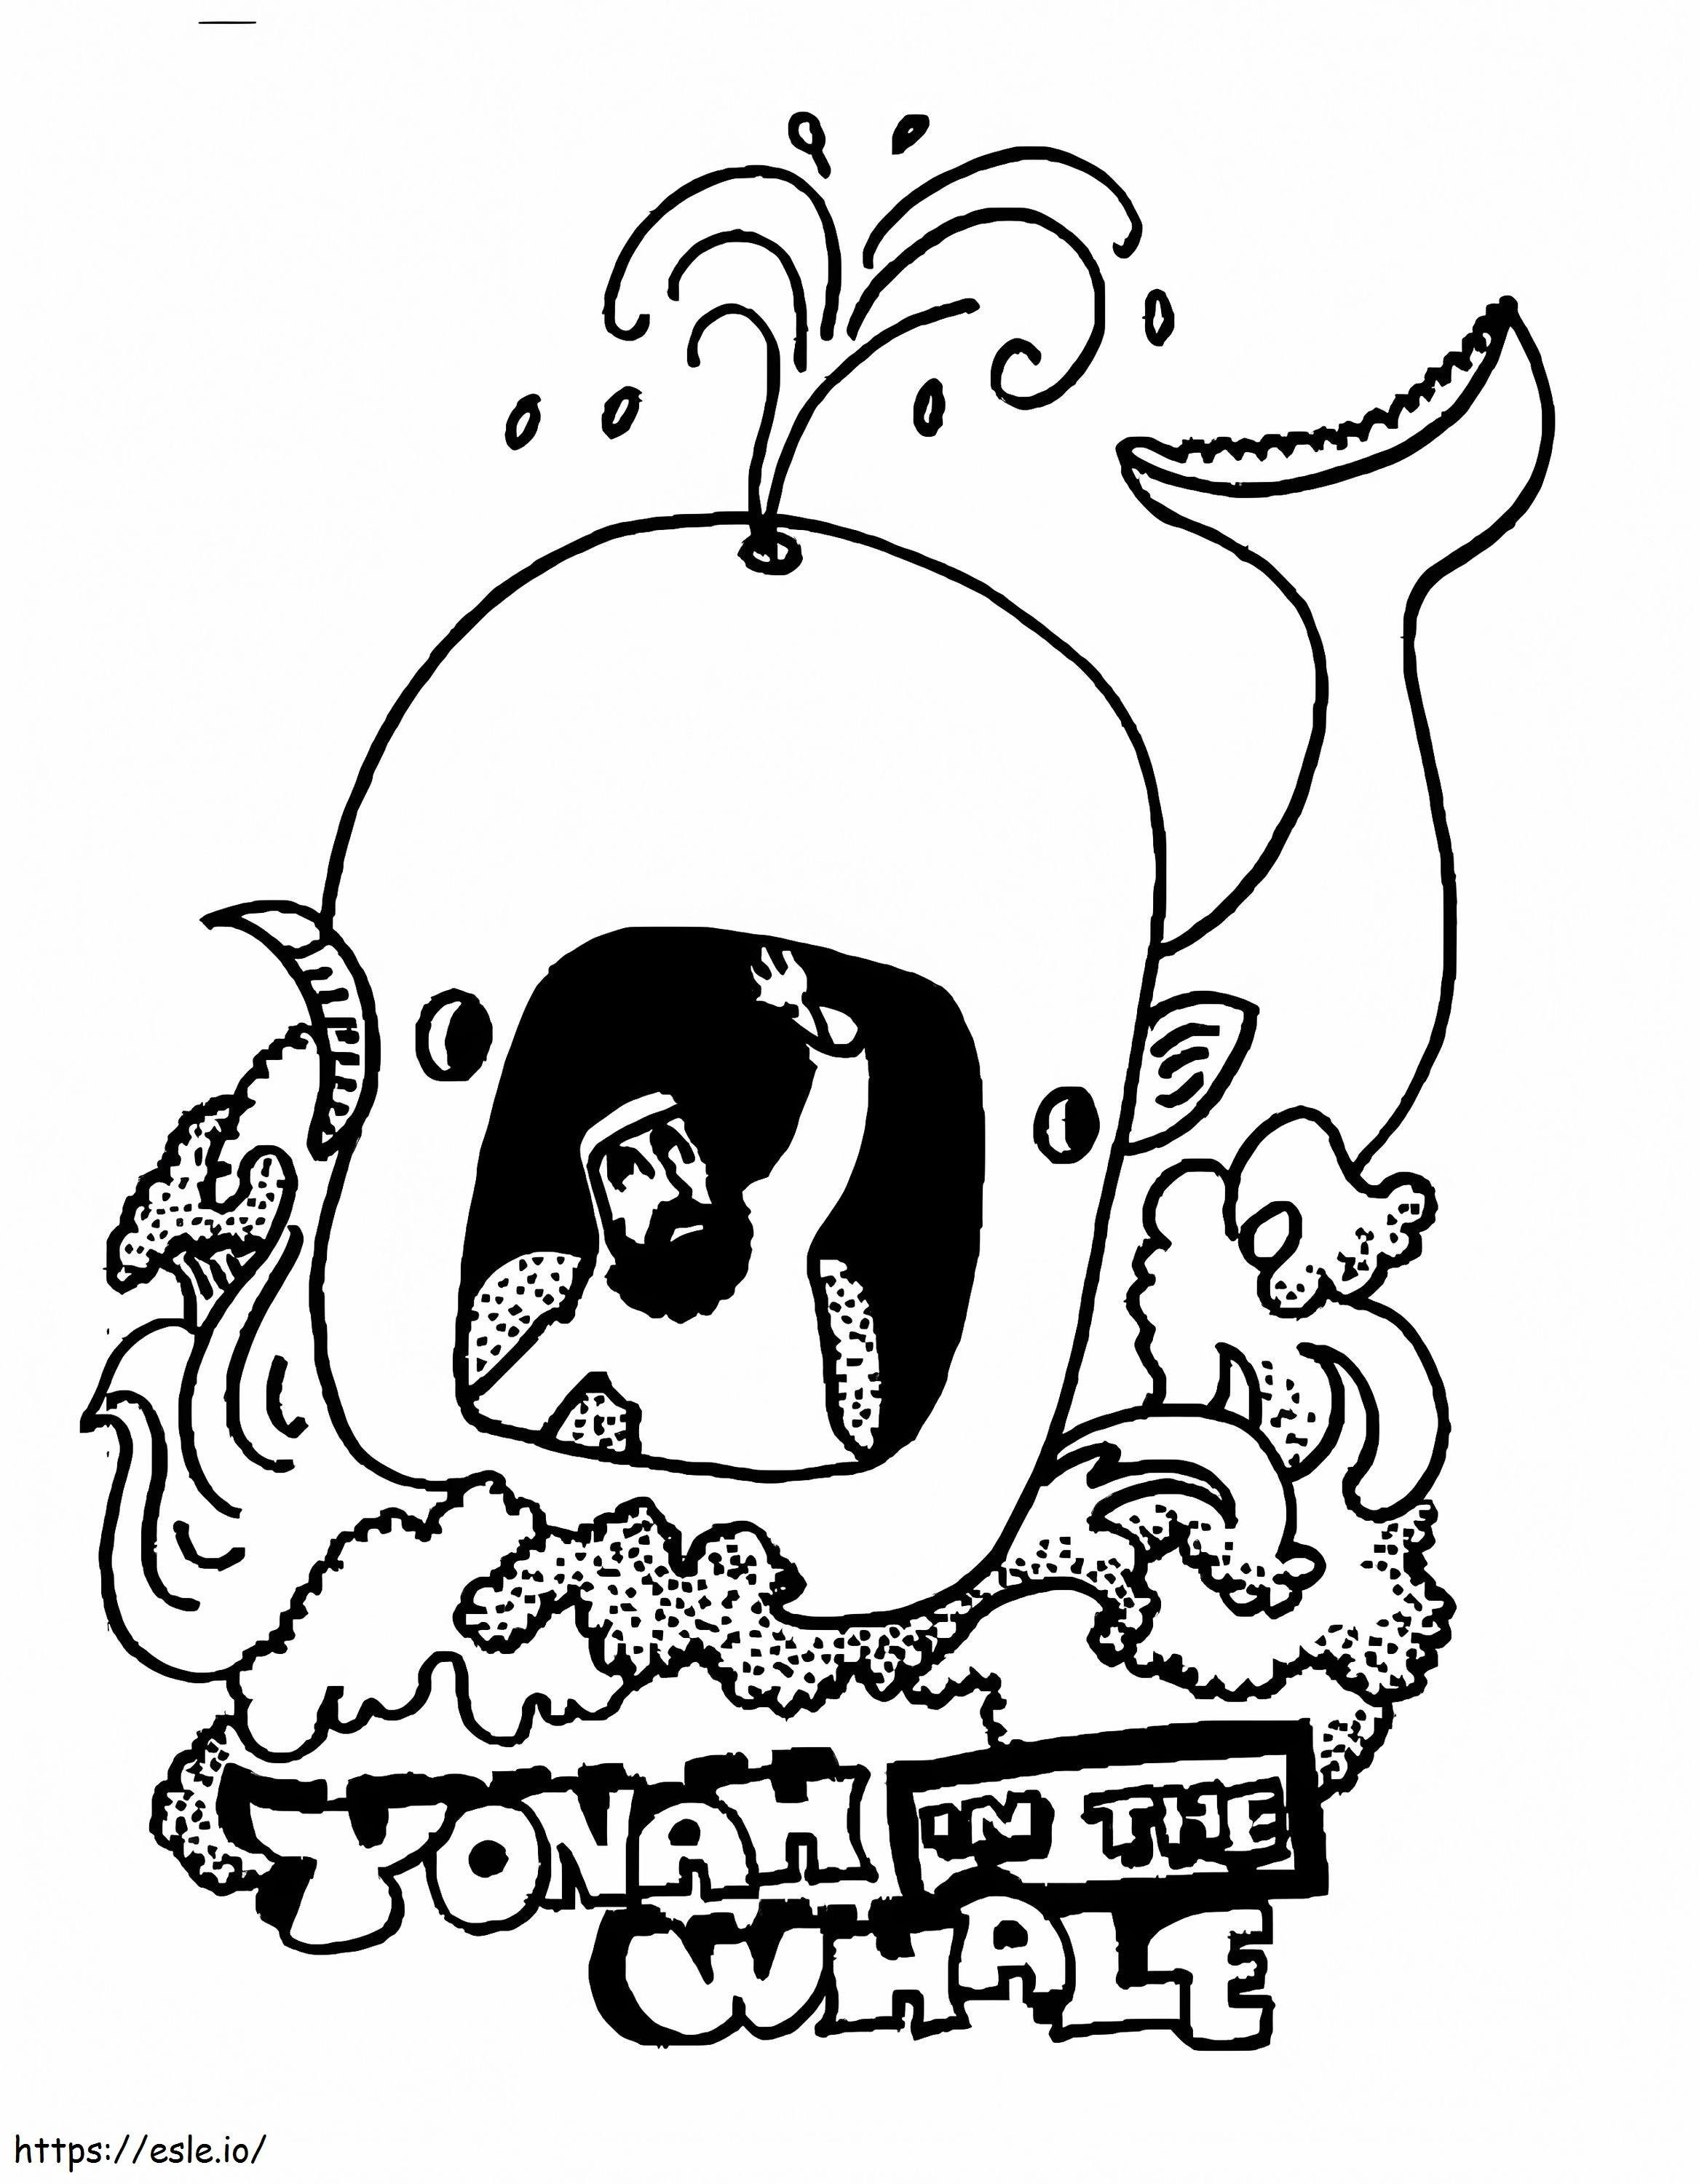 Jonah And The Whale 13 coloring page